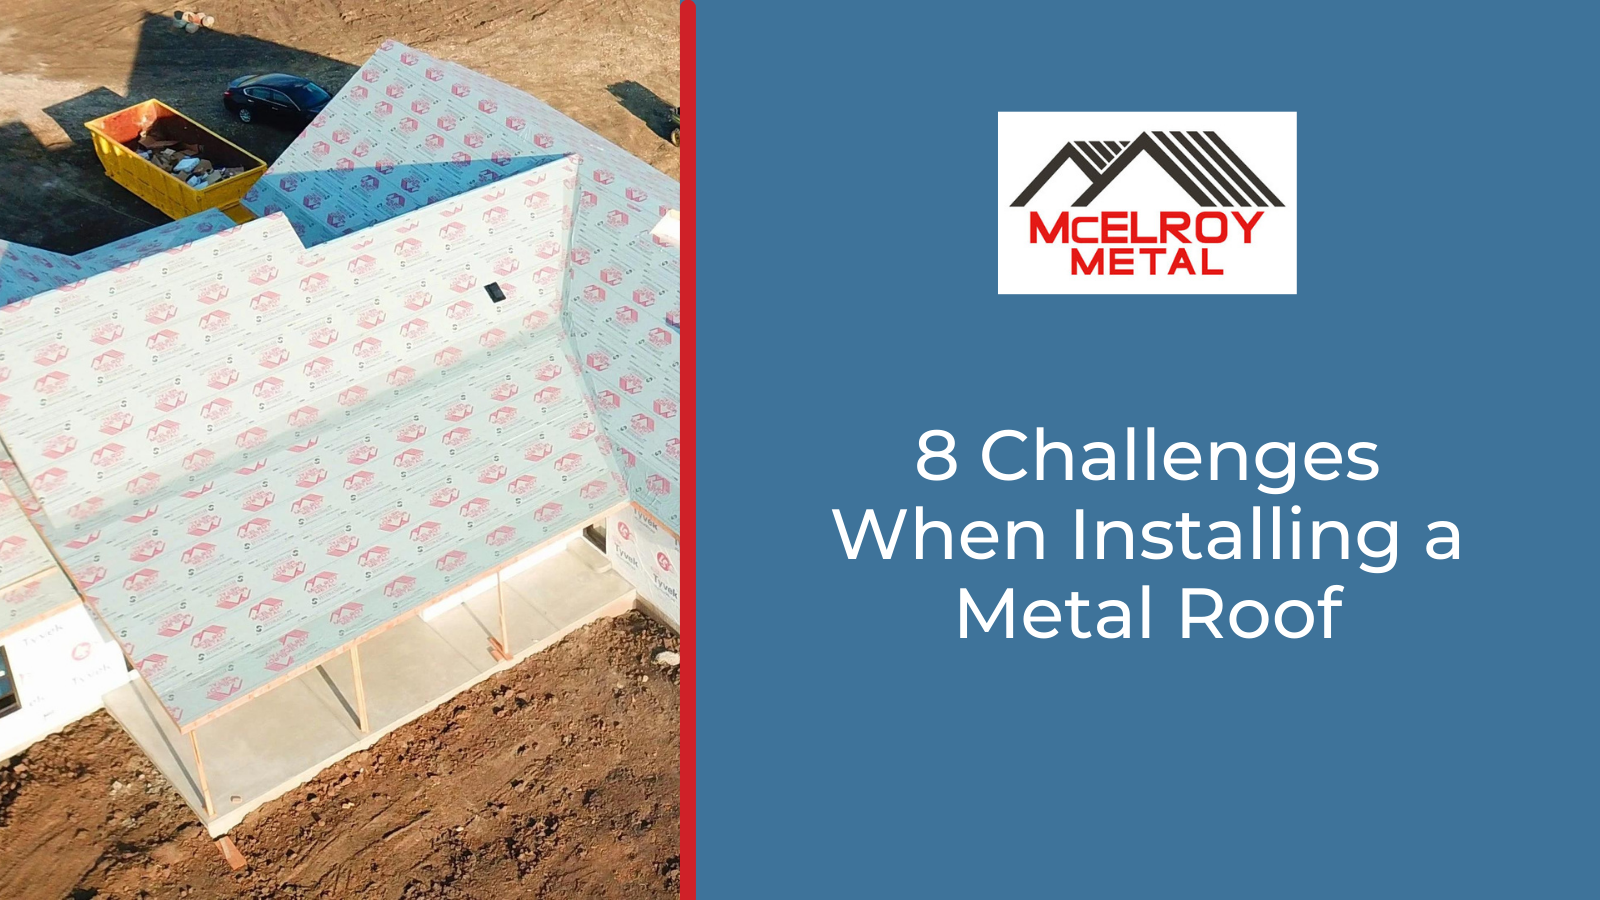 8 Challenges When Installing a Metal Roof